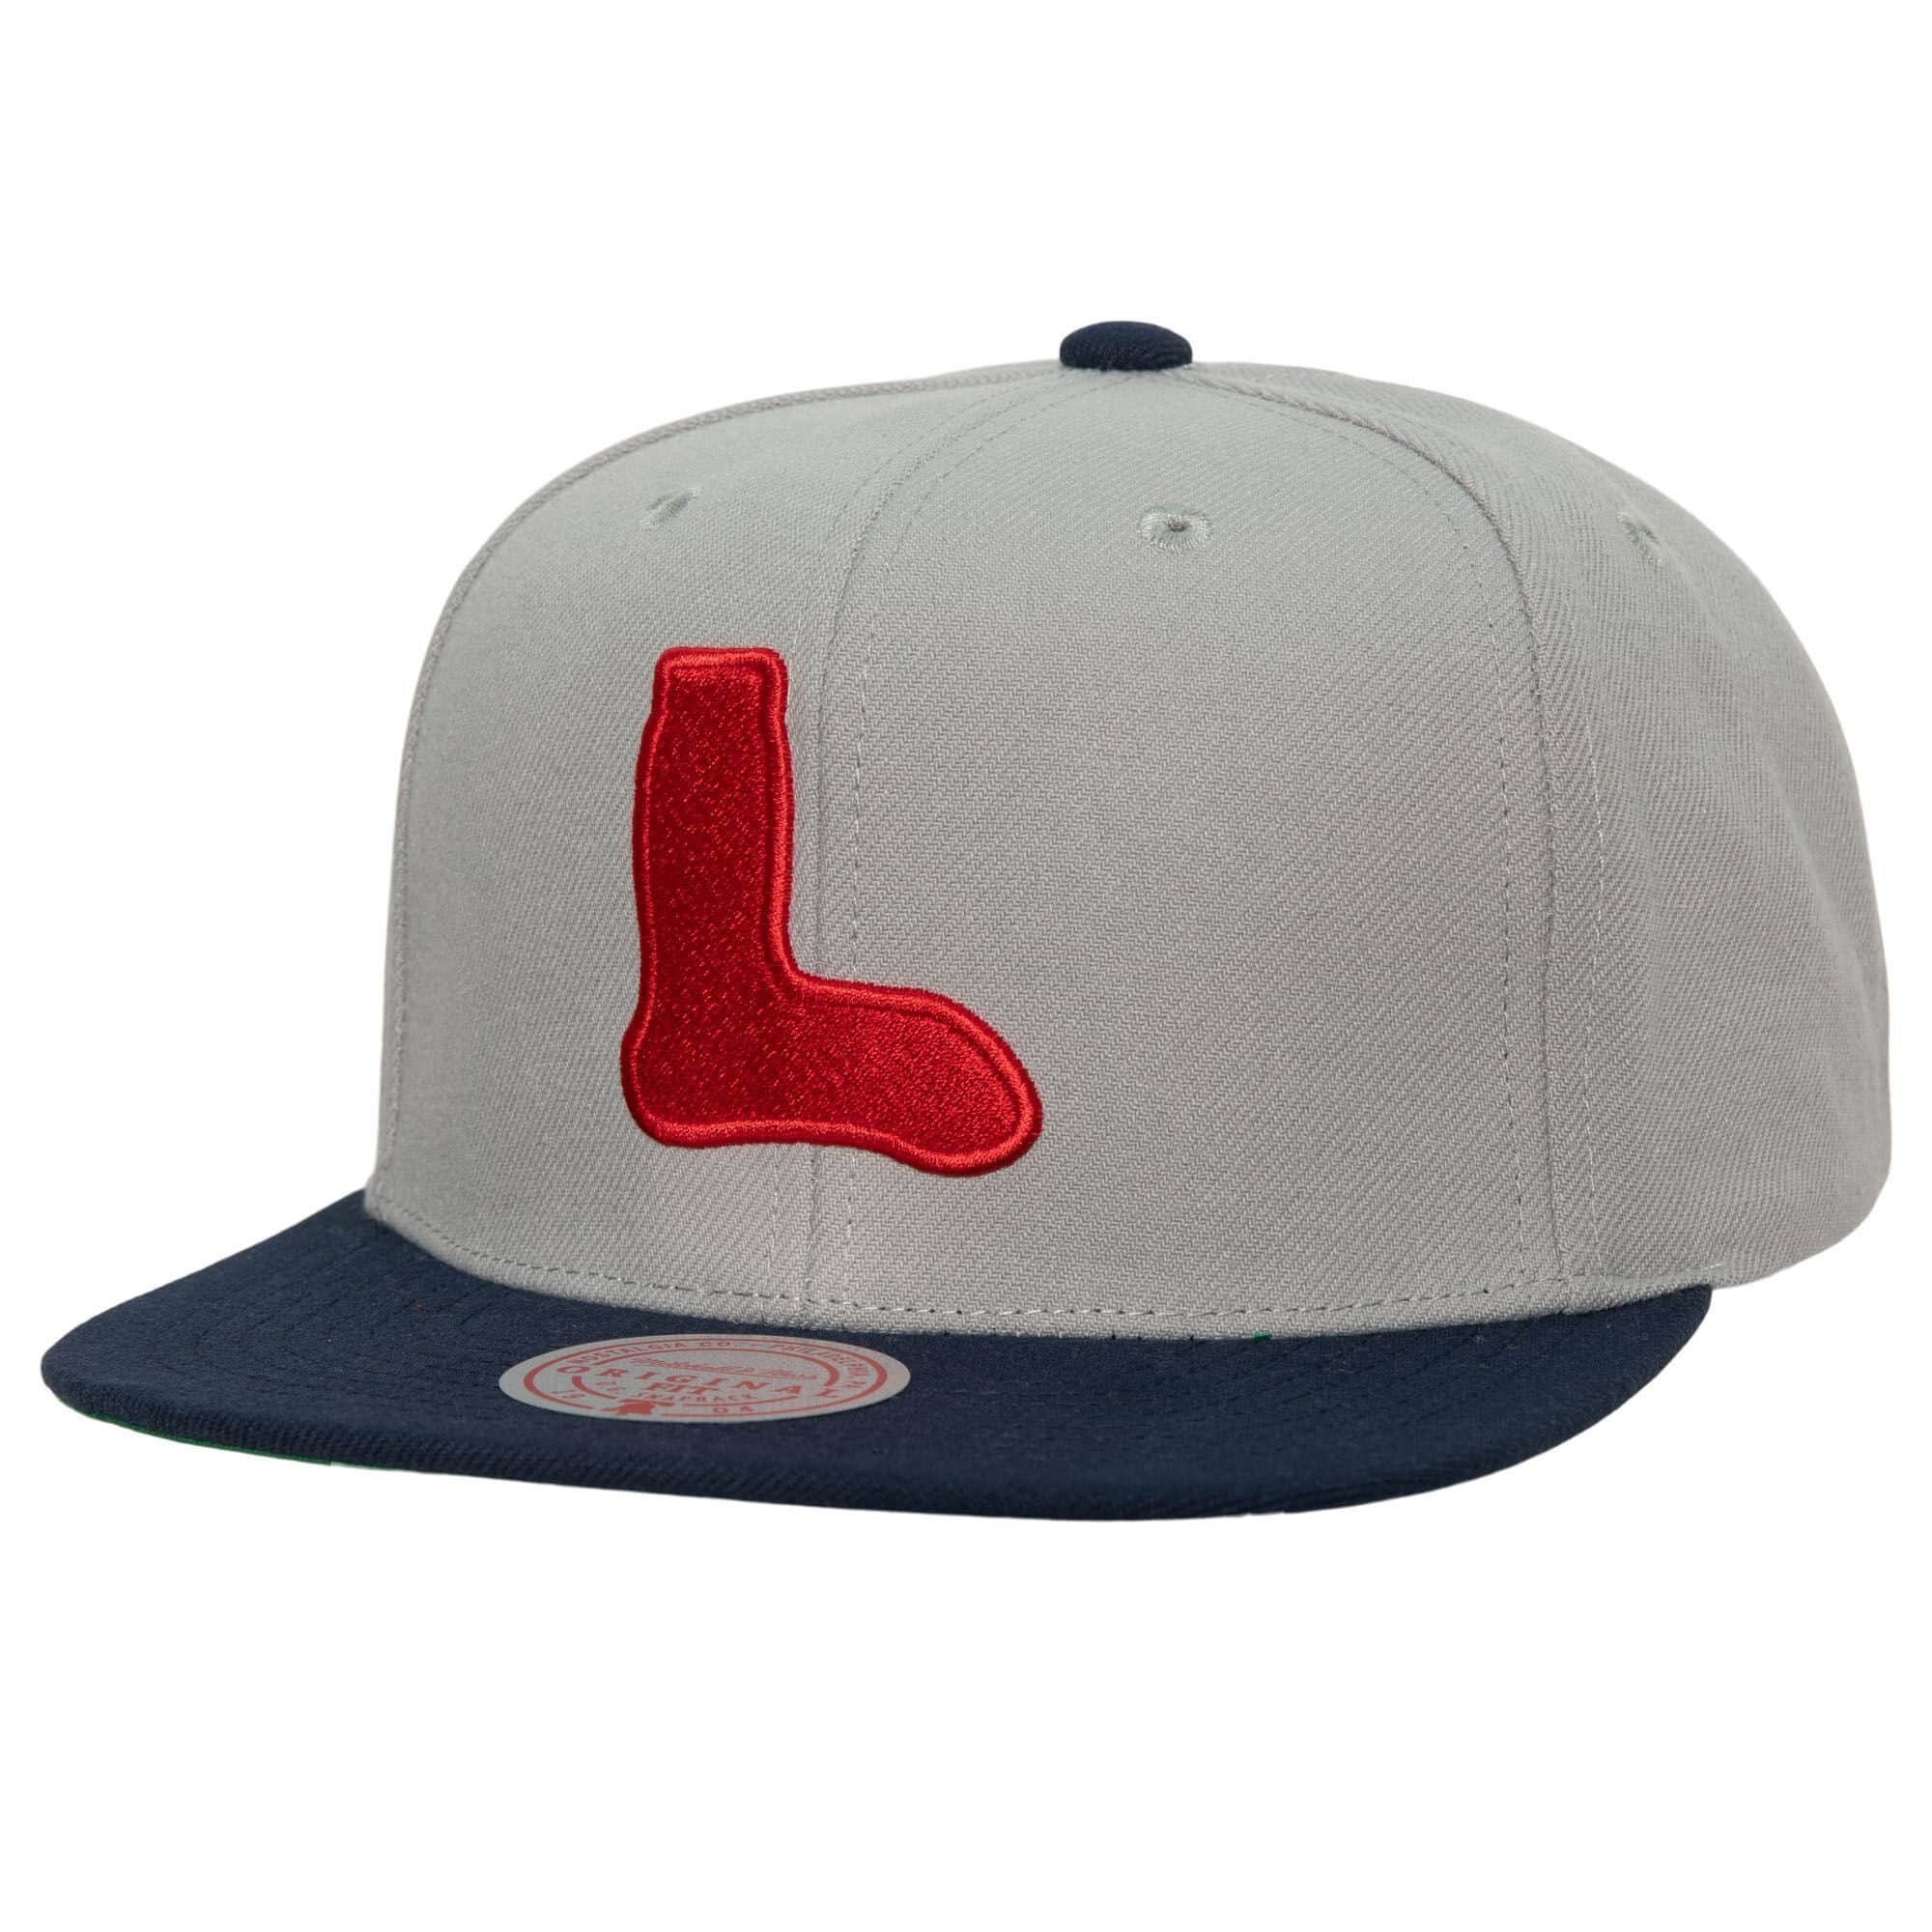 Mitchell & Ness Away Snapback Coop Boston Red Sox